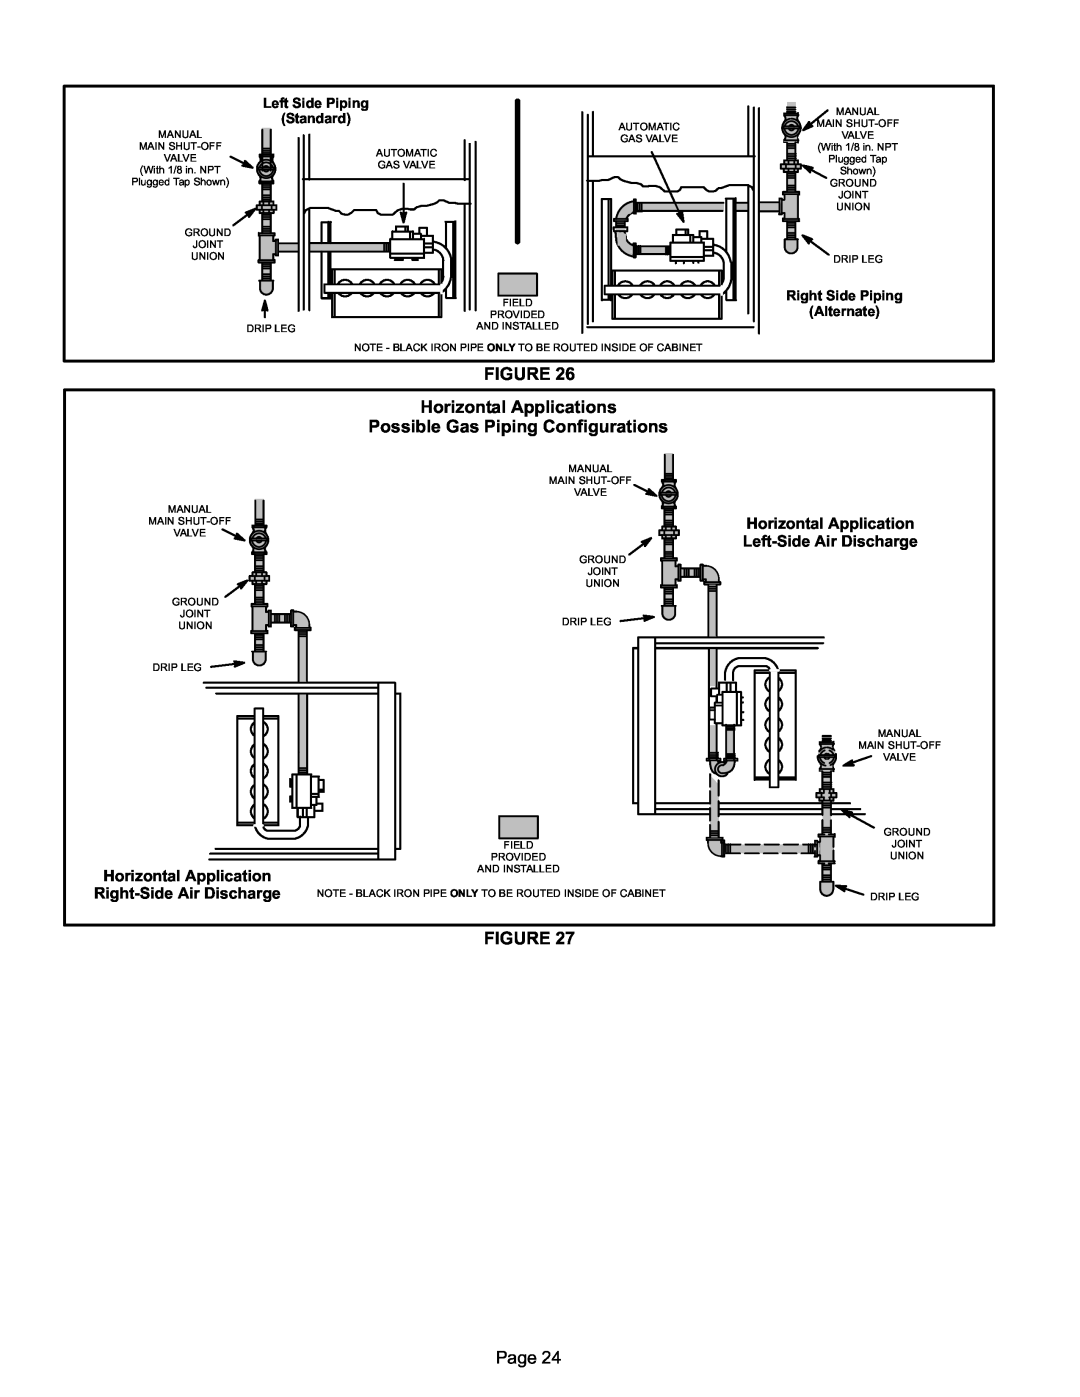 Lennox International Inc EL280UH FIGURE Horizontal Applications, Possible Gas Piping Configurations, Page 